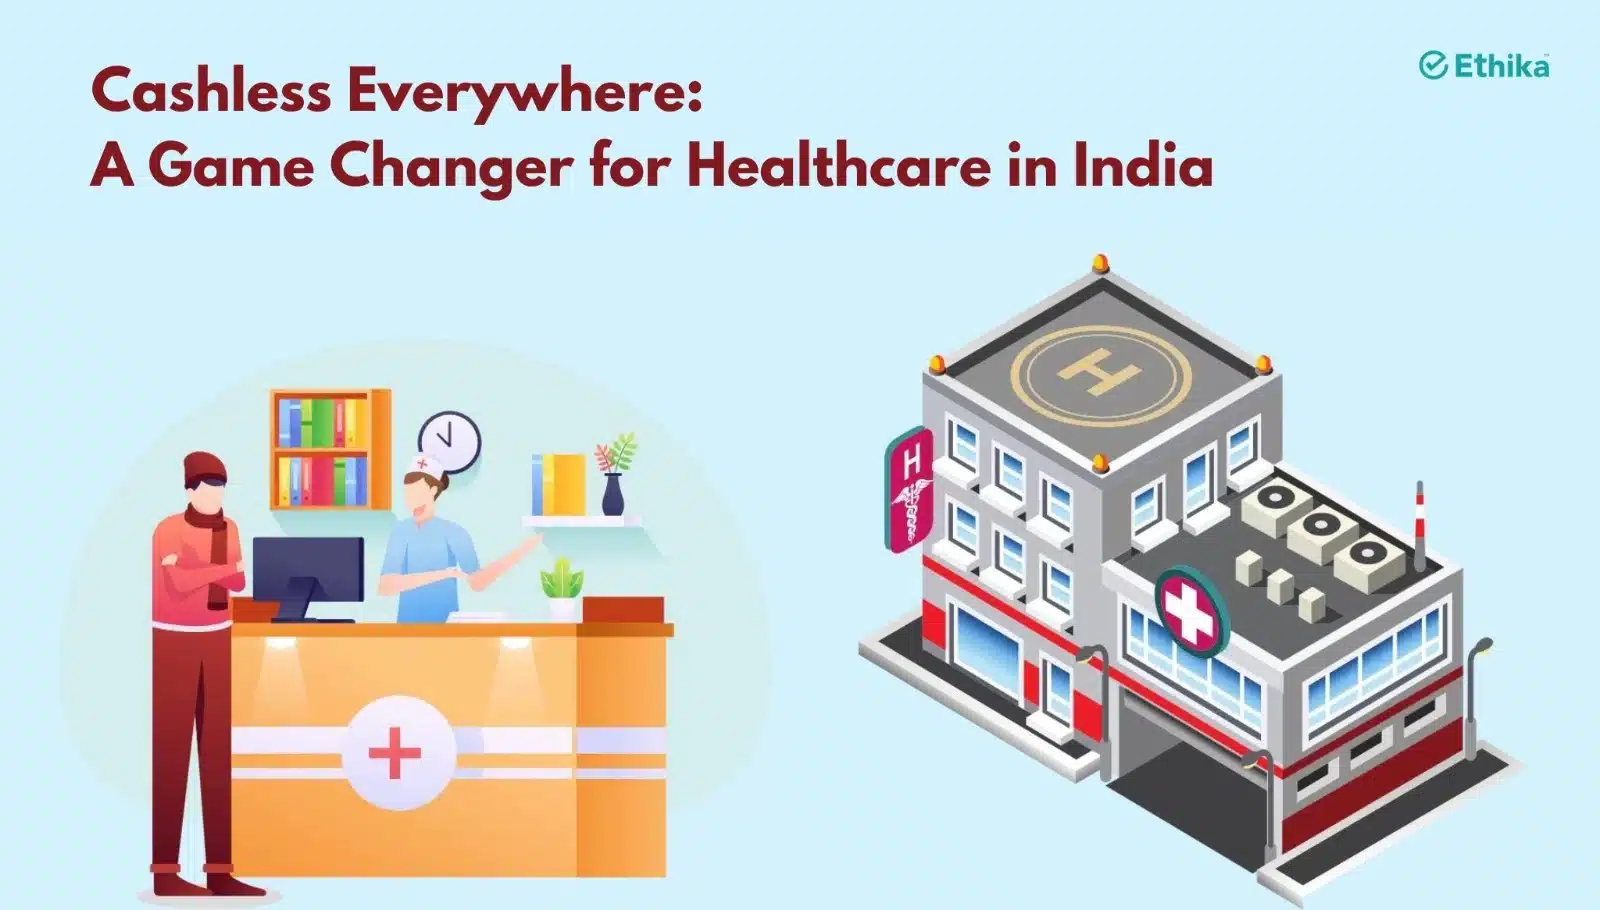 Cashless Everywhere: A Game Changer for Healthcare in India